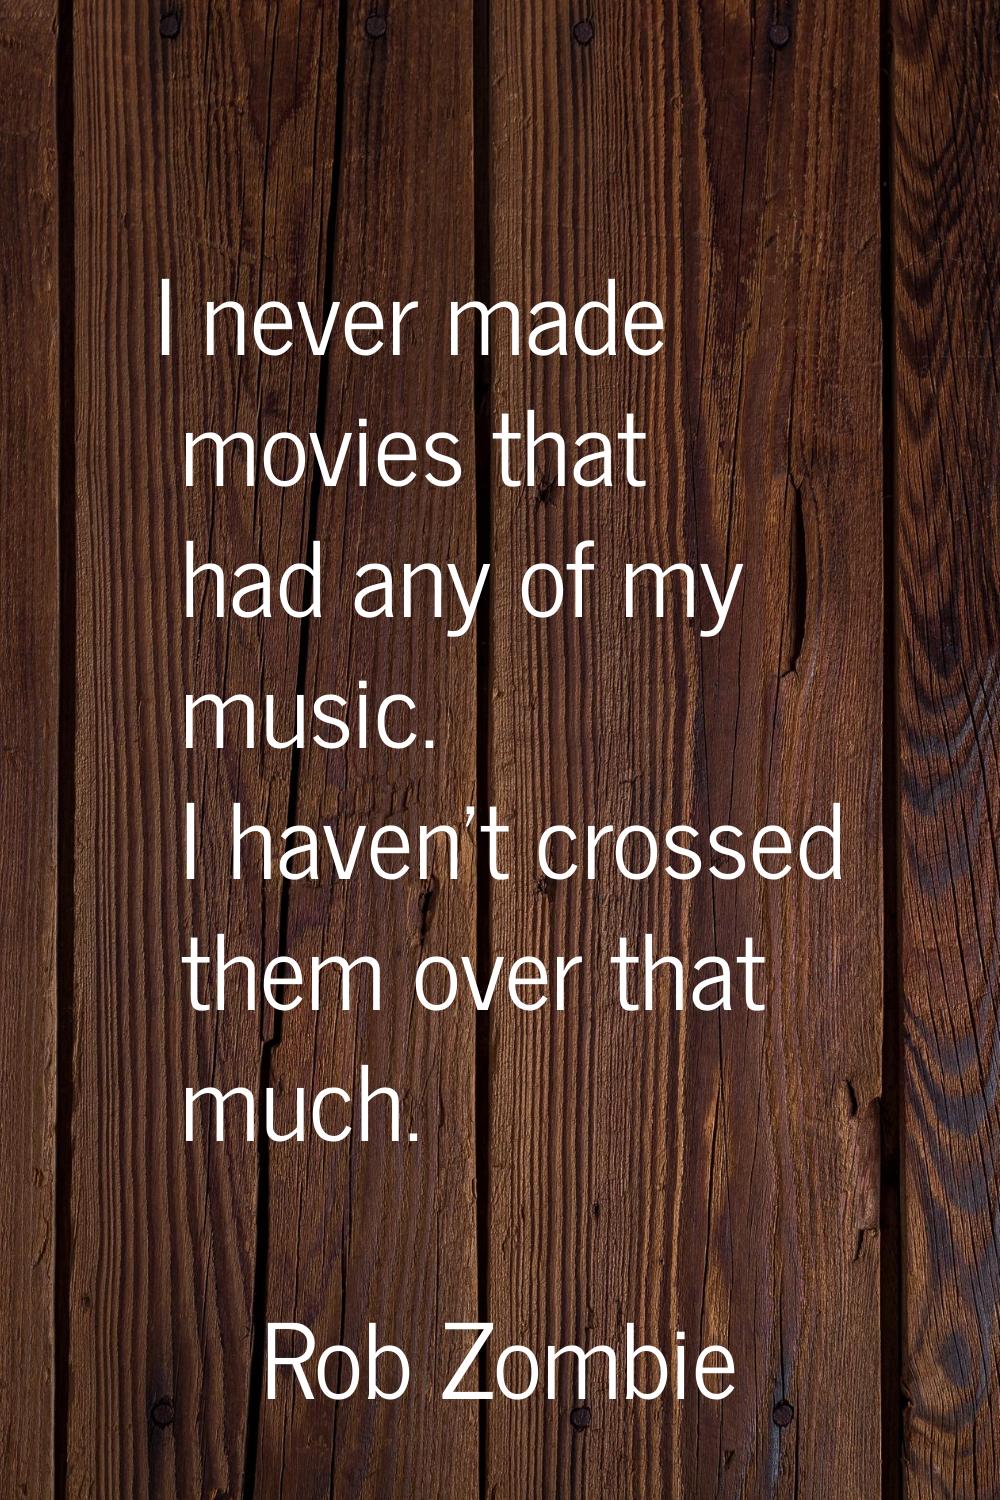 I never made movies that had any of my music. I haven't crossed them over that much.